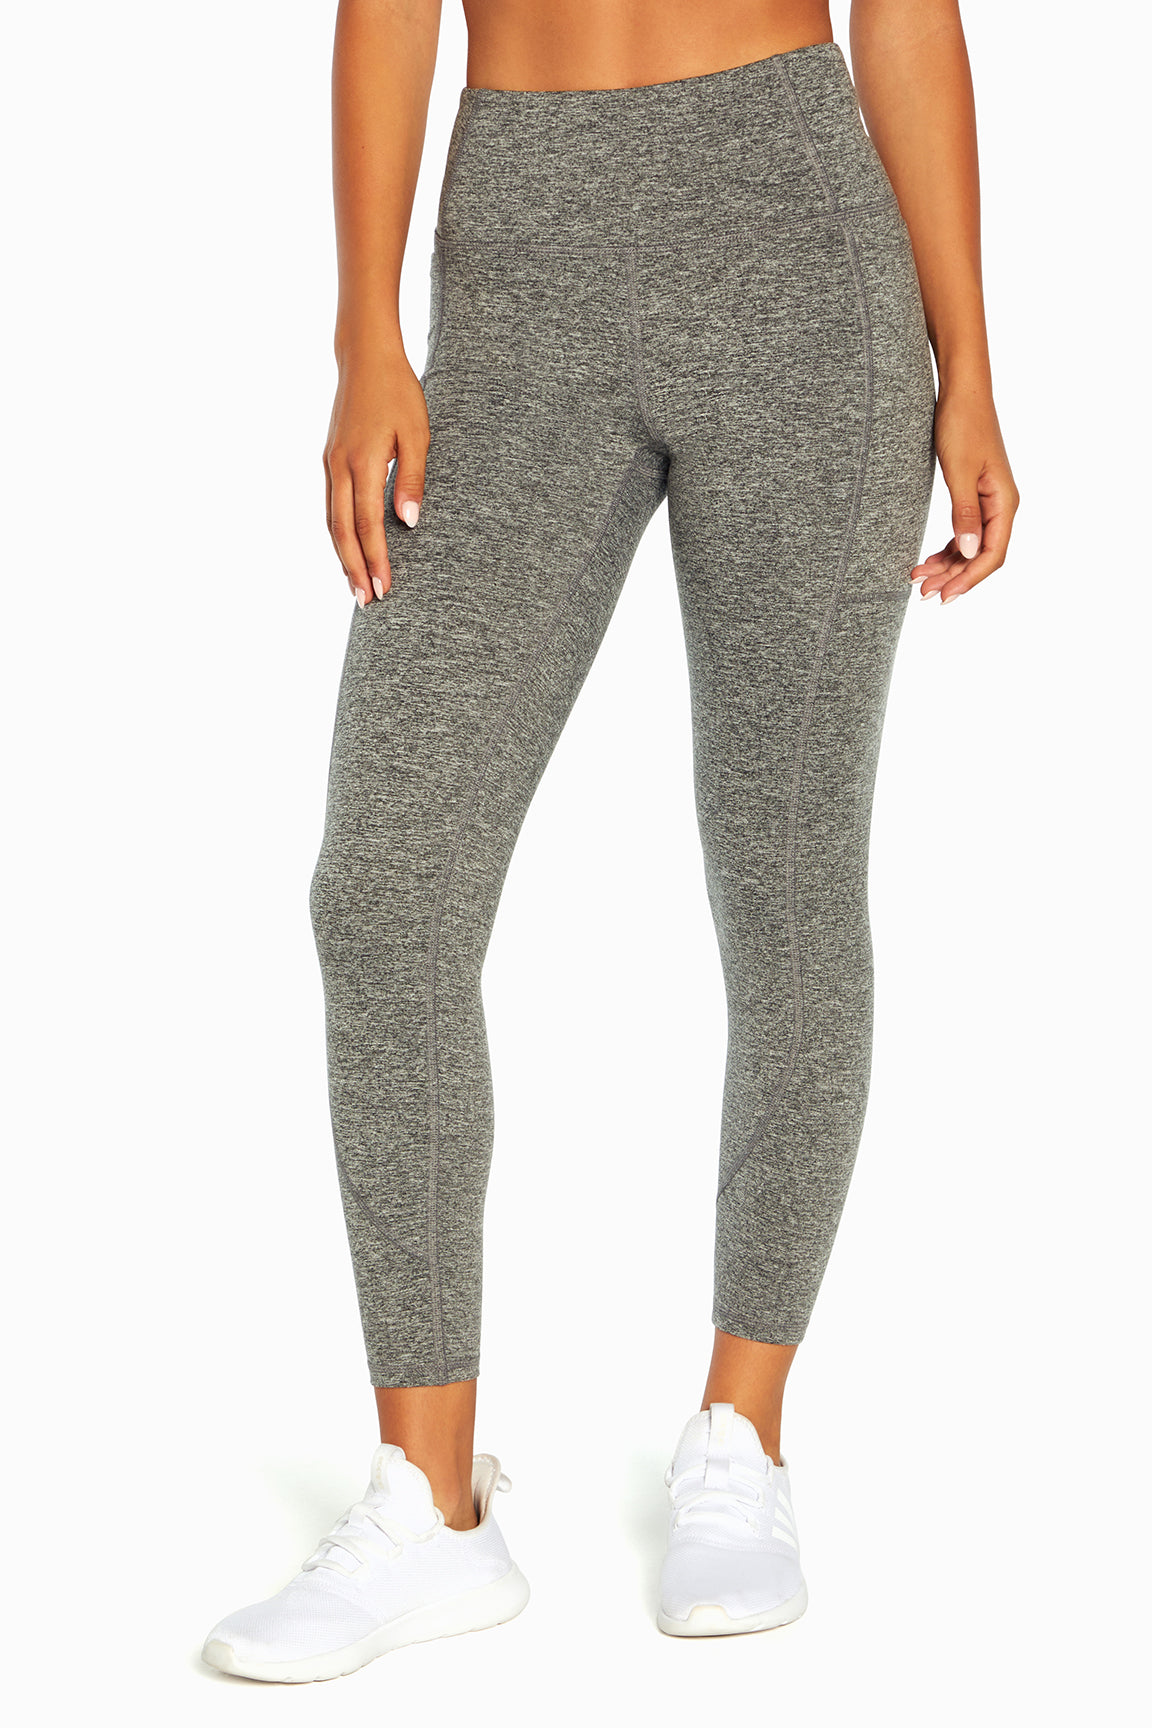 The Balance Collection Leggings Small White Gray Marble Yoga Activewear